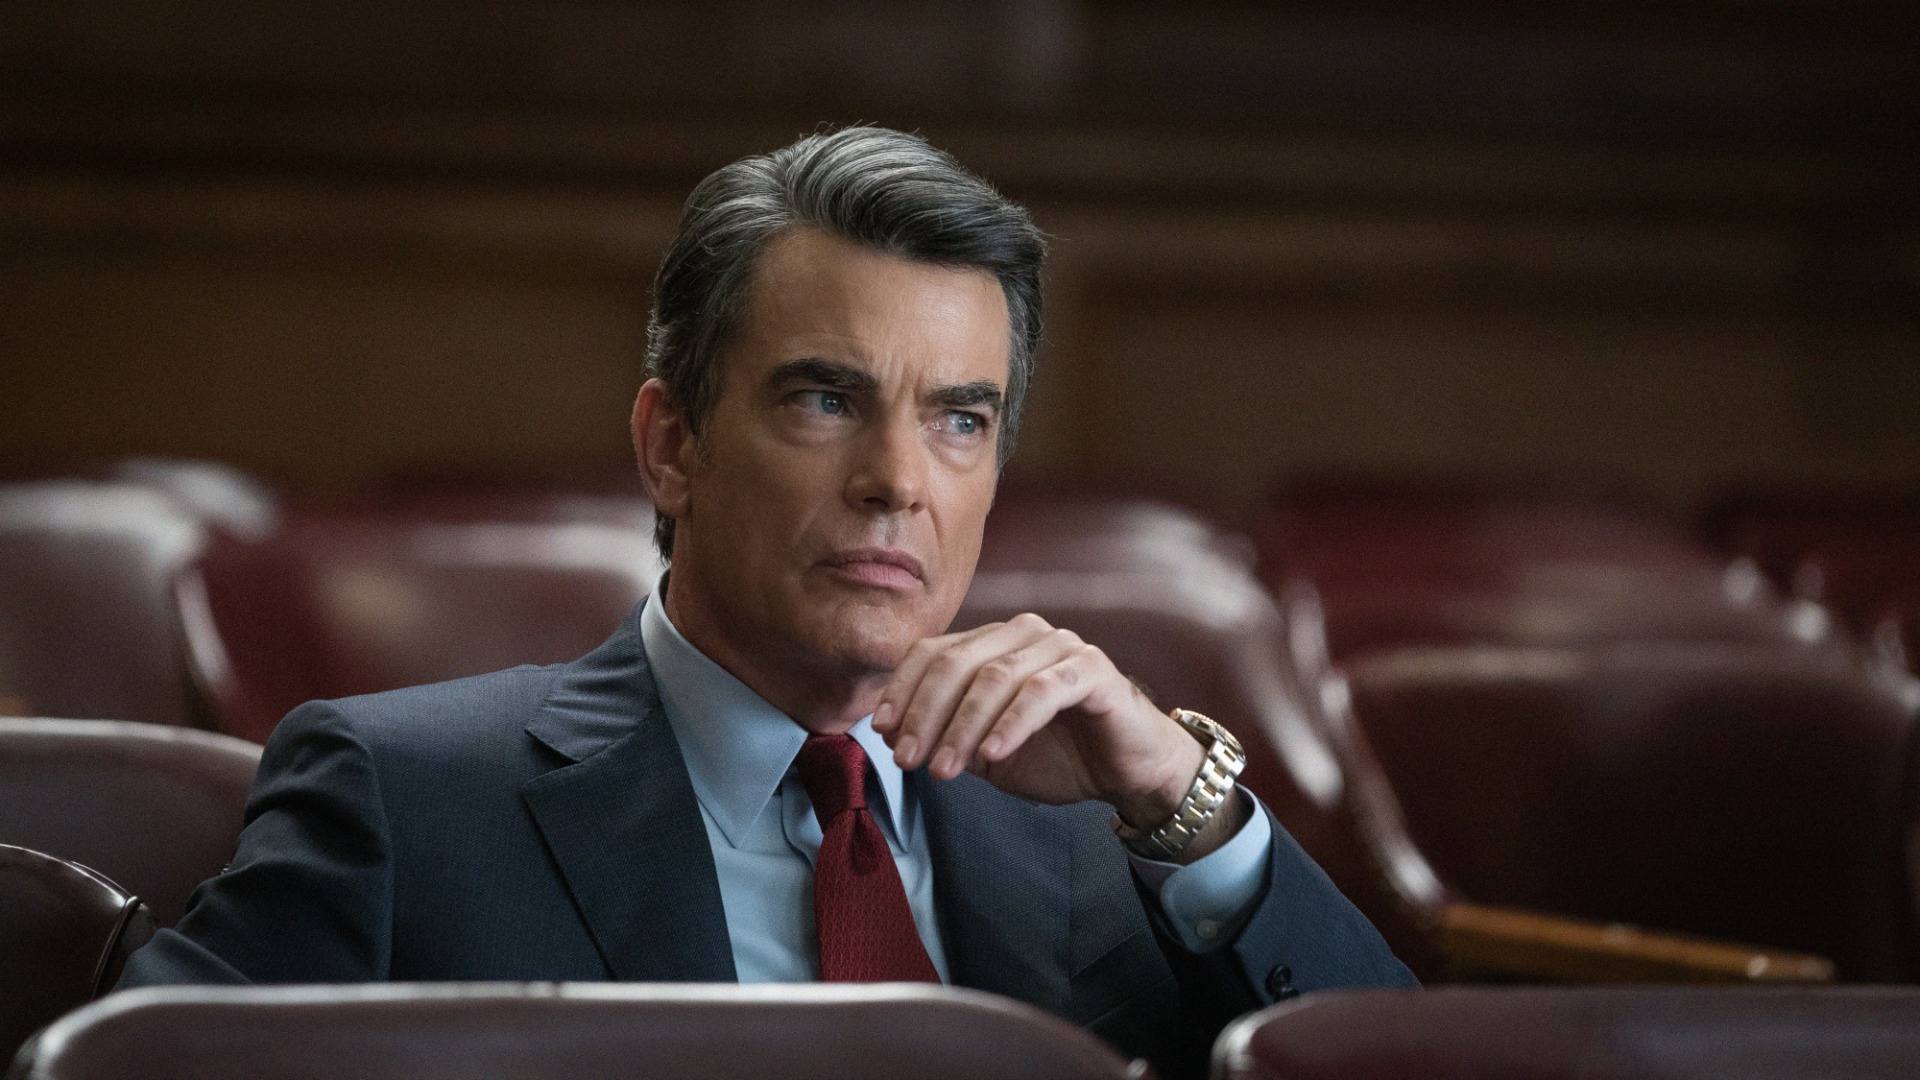 Peter Gallagher as Ethan Carver